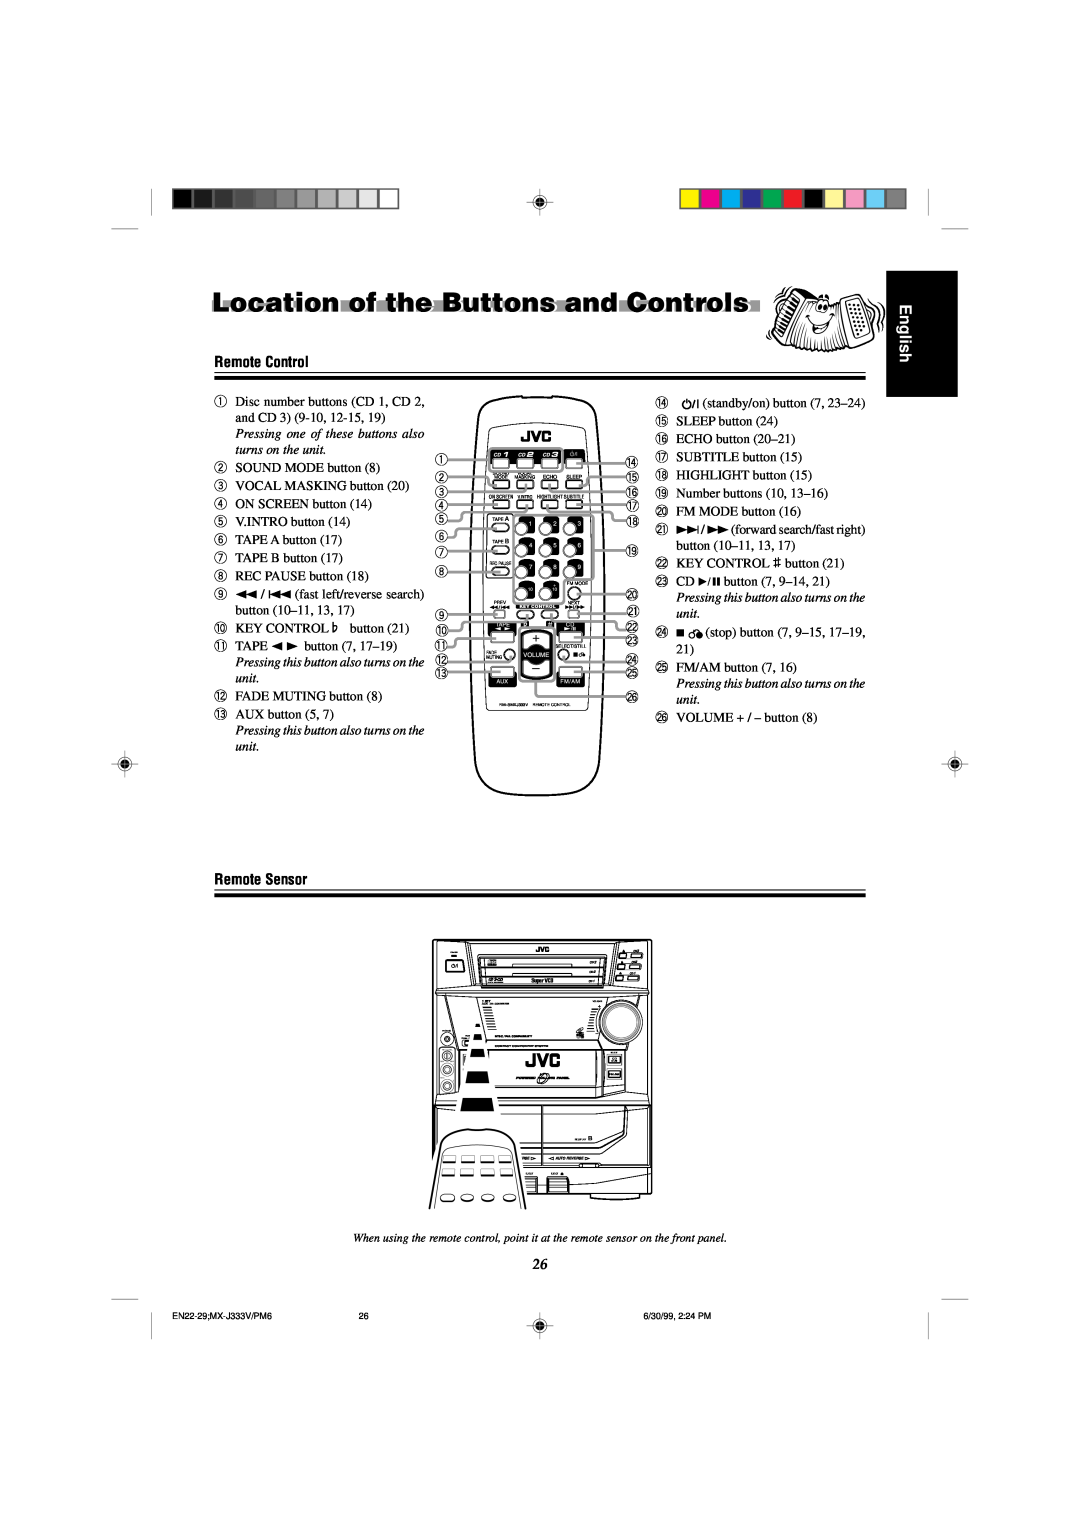 JVC MX-J333VU manual Location of the Buttons and Controls, English, Remote Control, Remote Sensor 